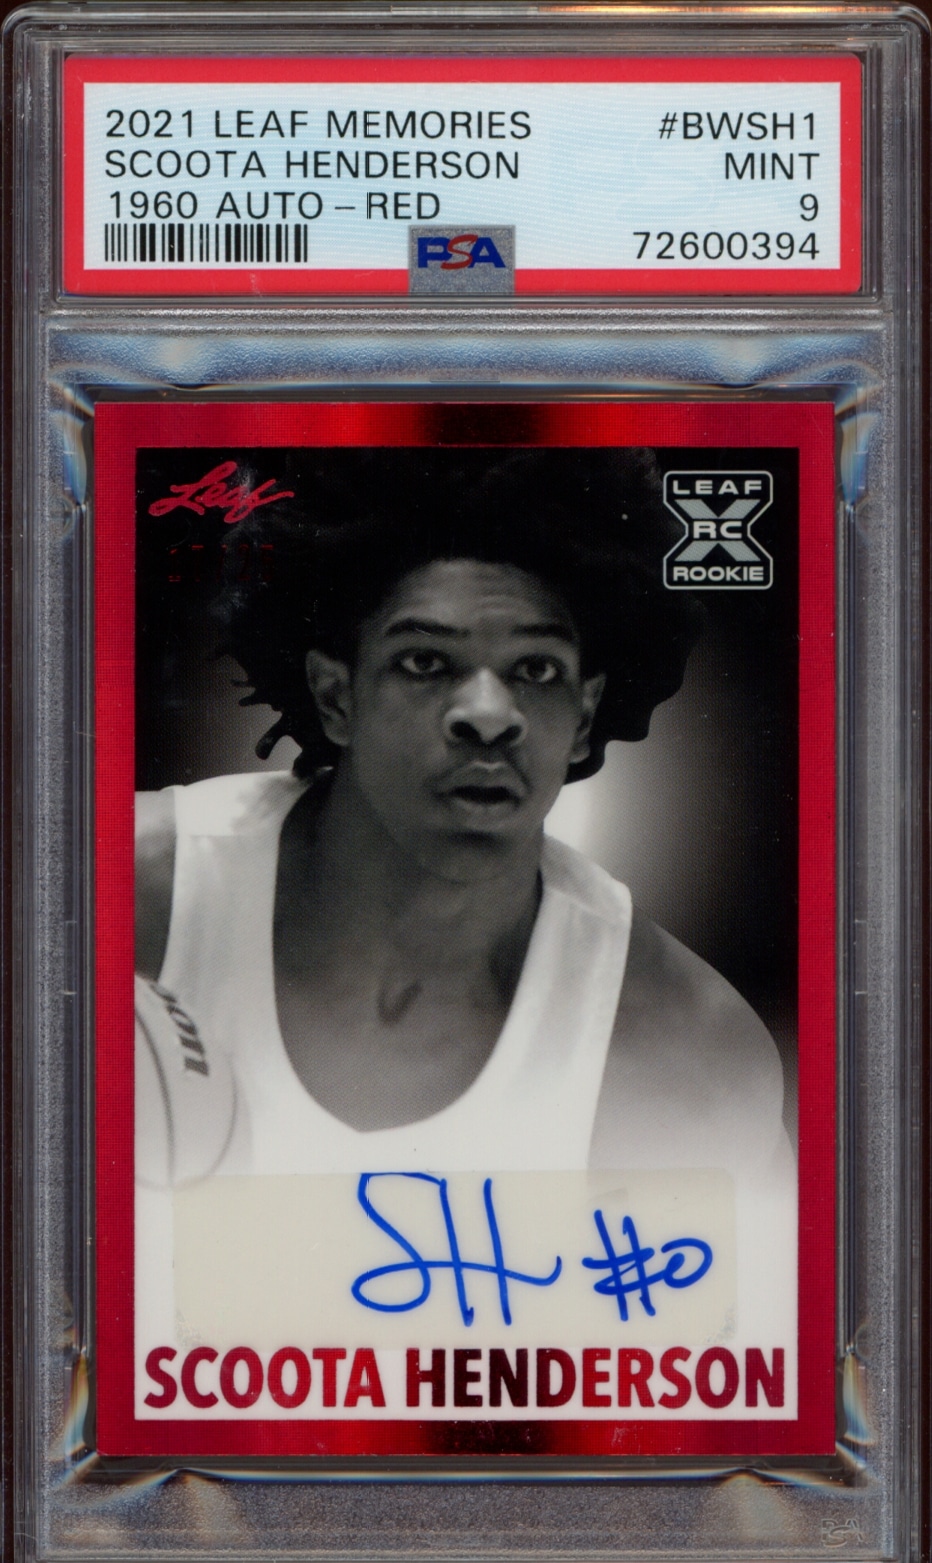 Scoota Hendersons 2021 Leaf Memories trading card with red design, autograph, and PSA 9 rating.